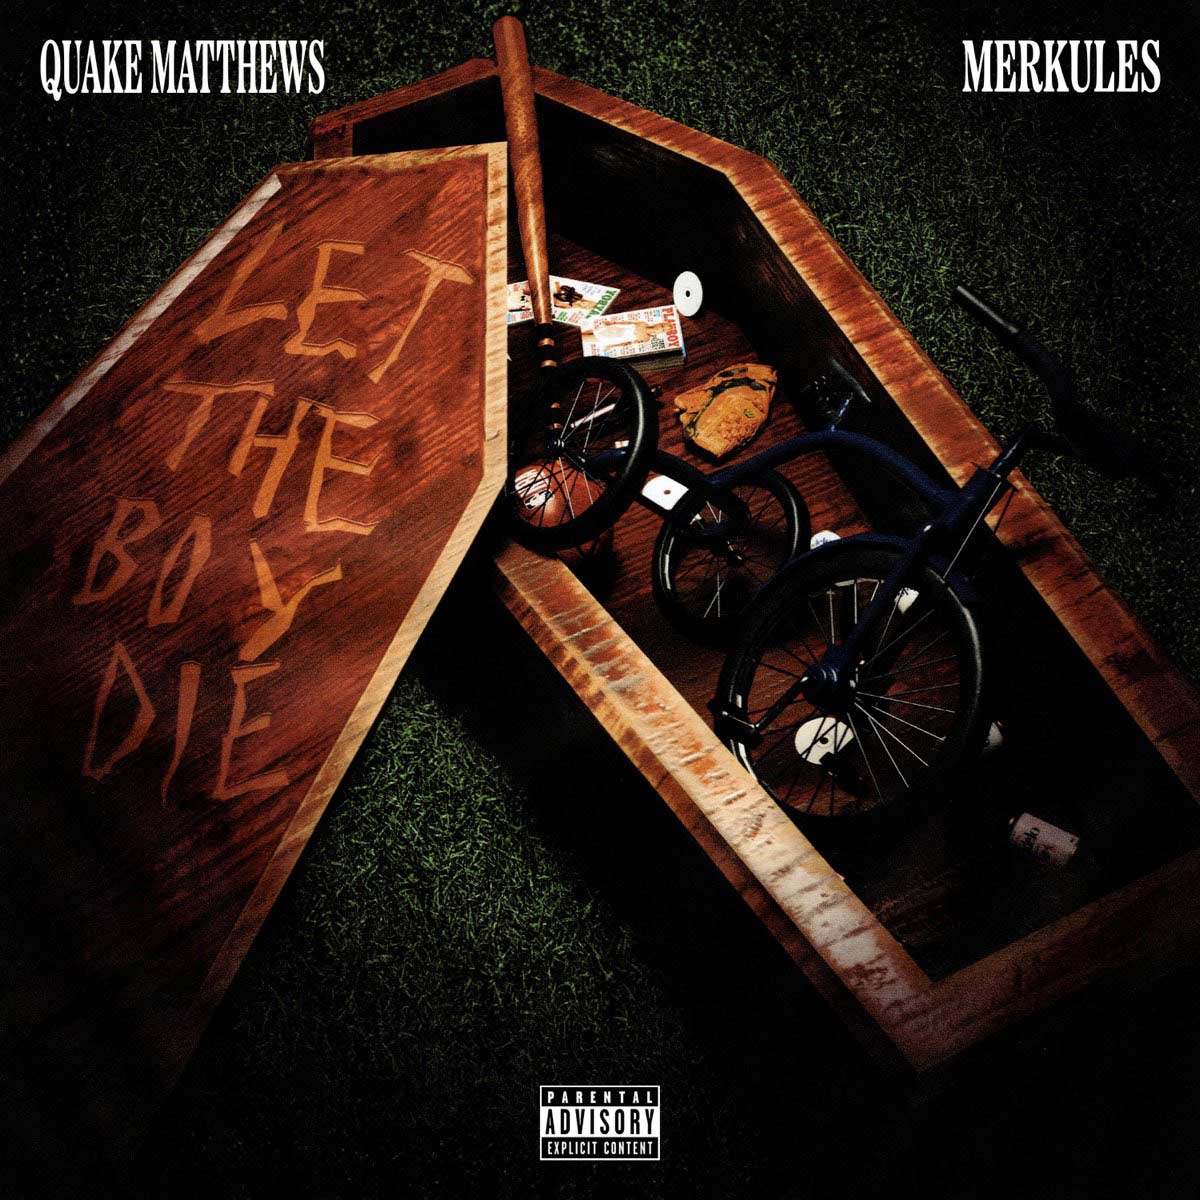 Artwork for Let The Boy Die single by Quake Matthews featuring Merkules